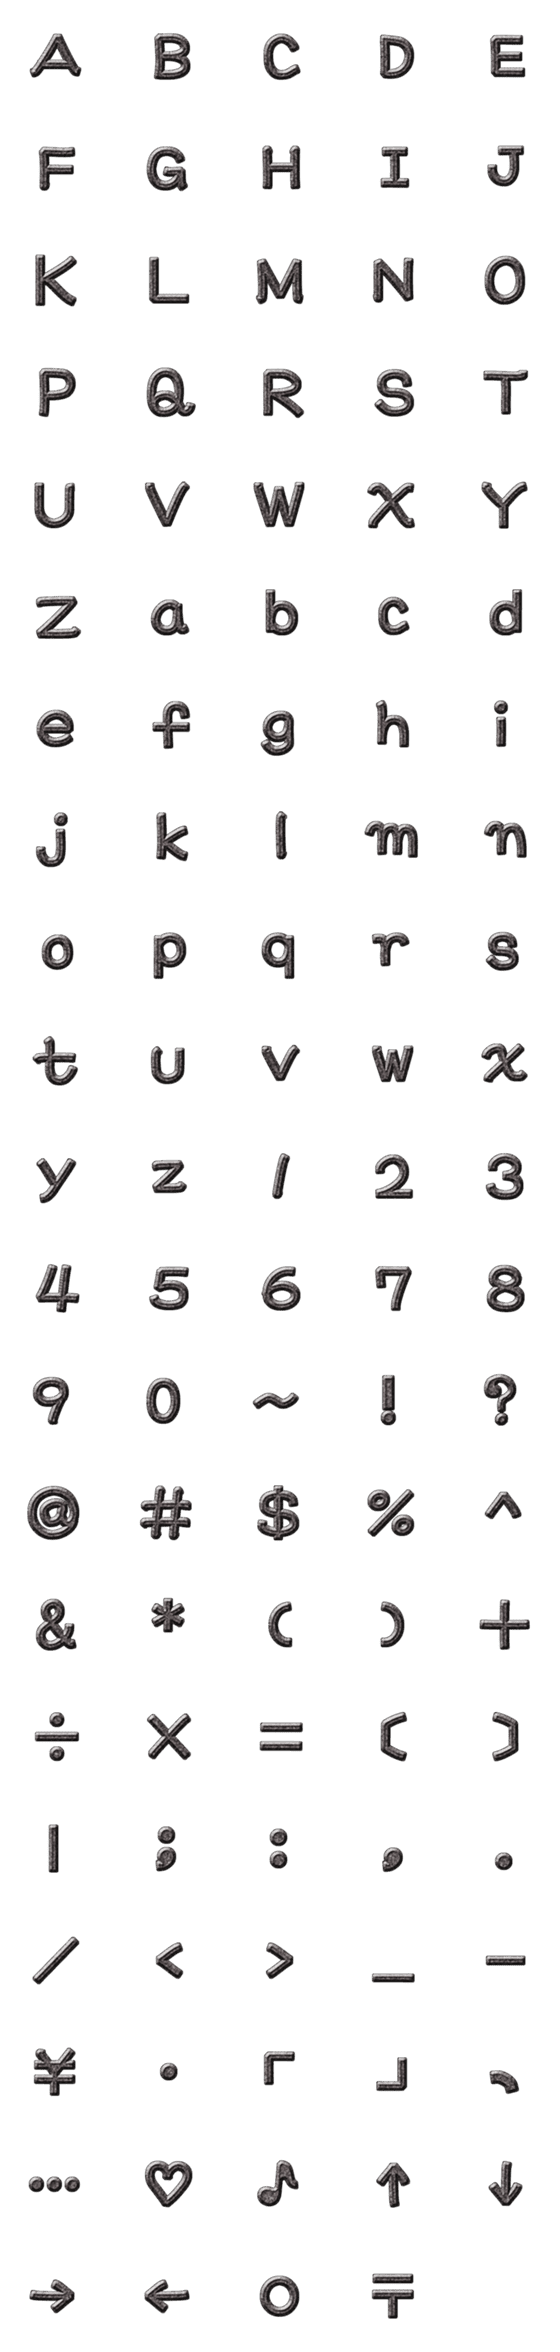 [LINE絵文字]Rust wordの画像一覧